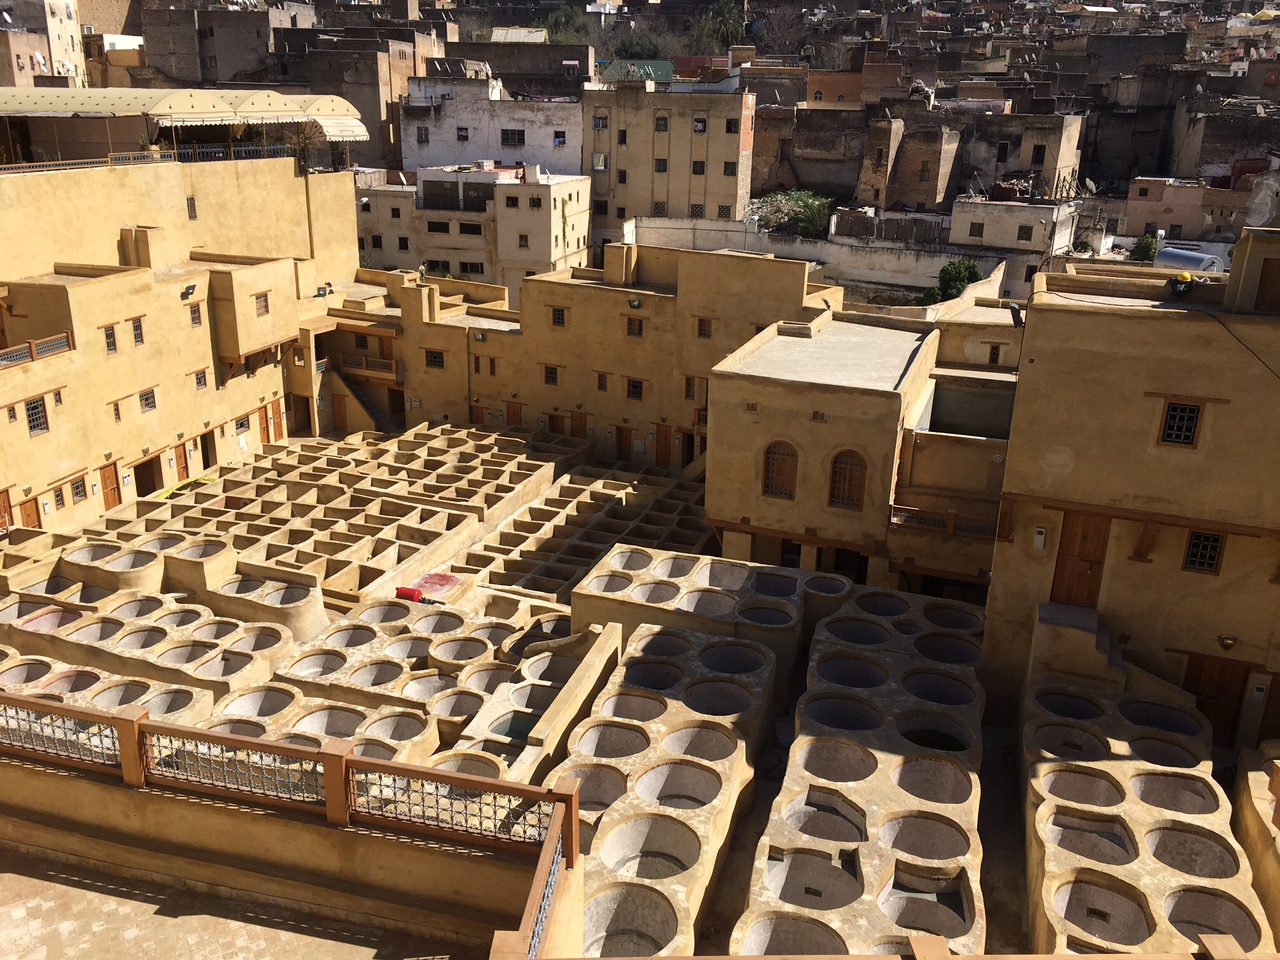 Leather tanneries of Fez